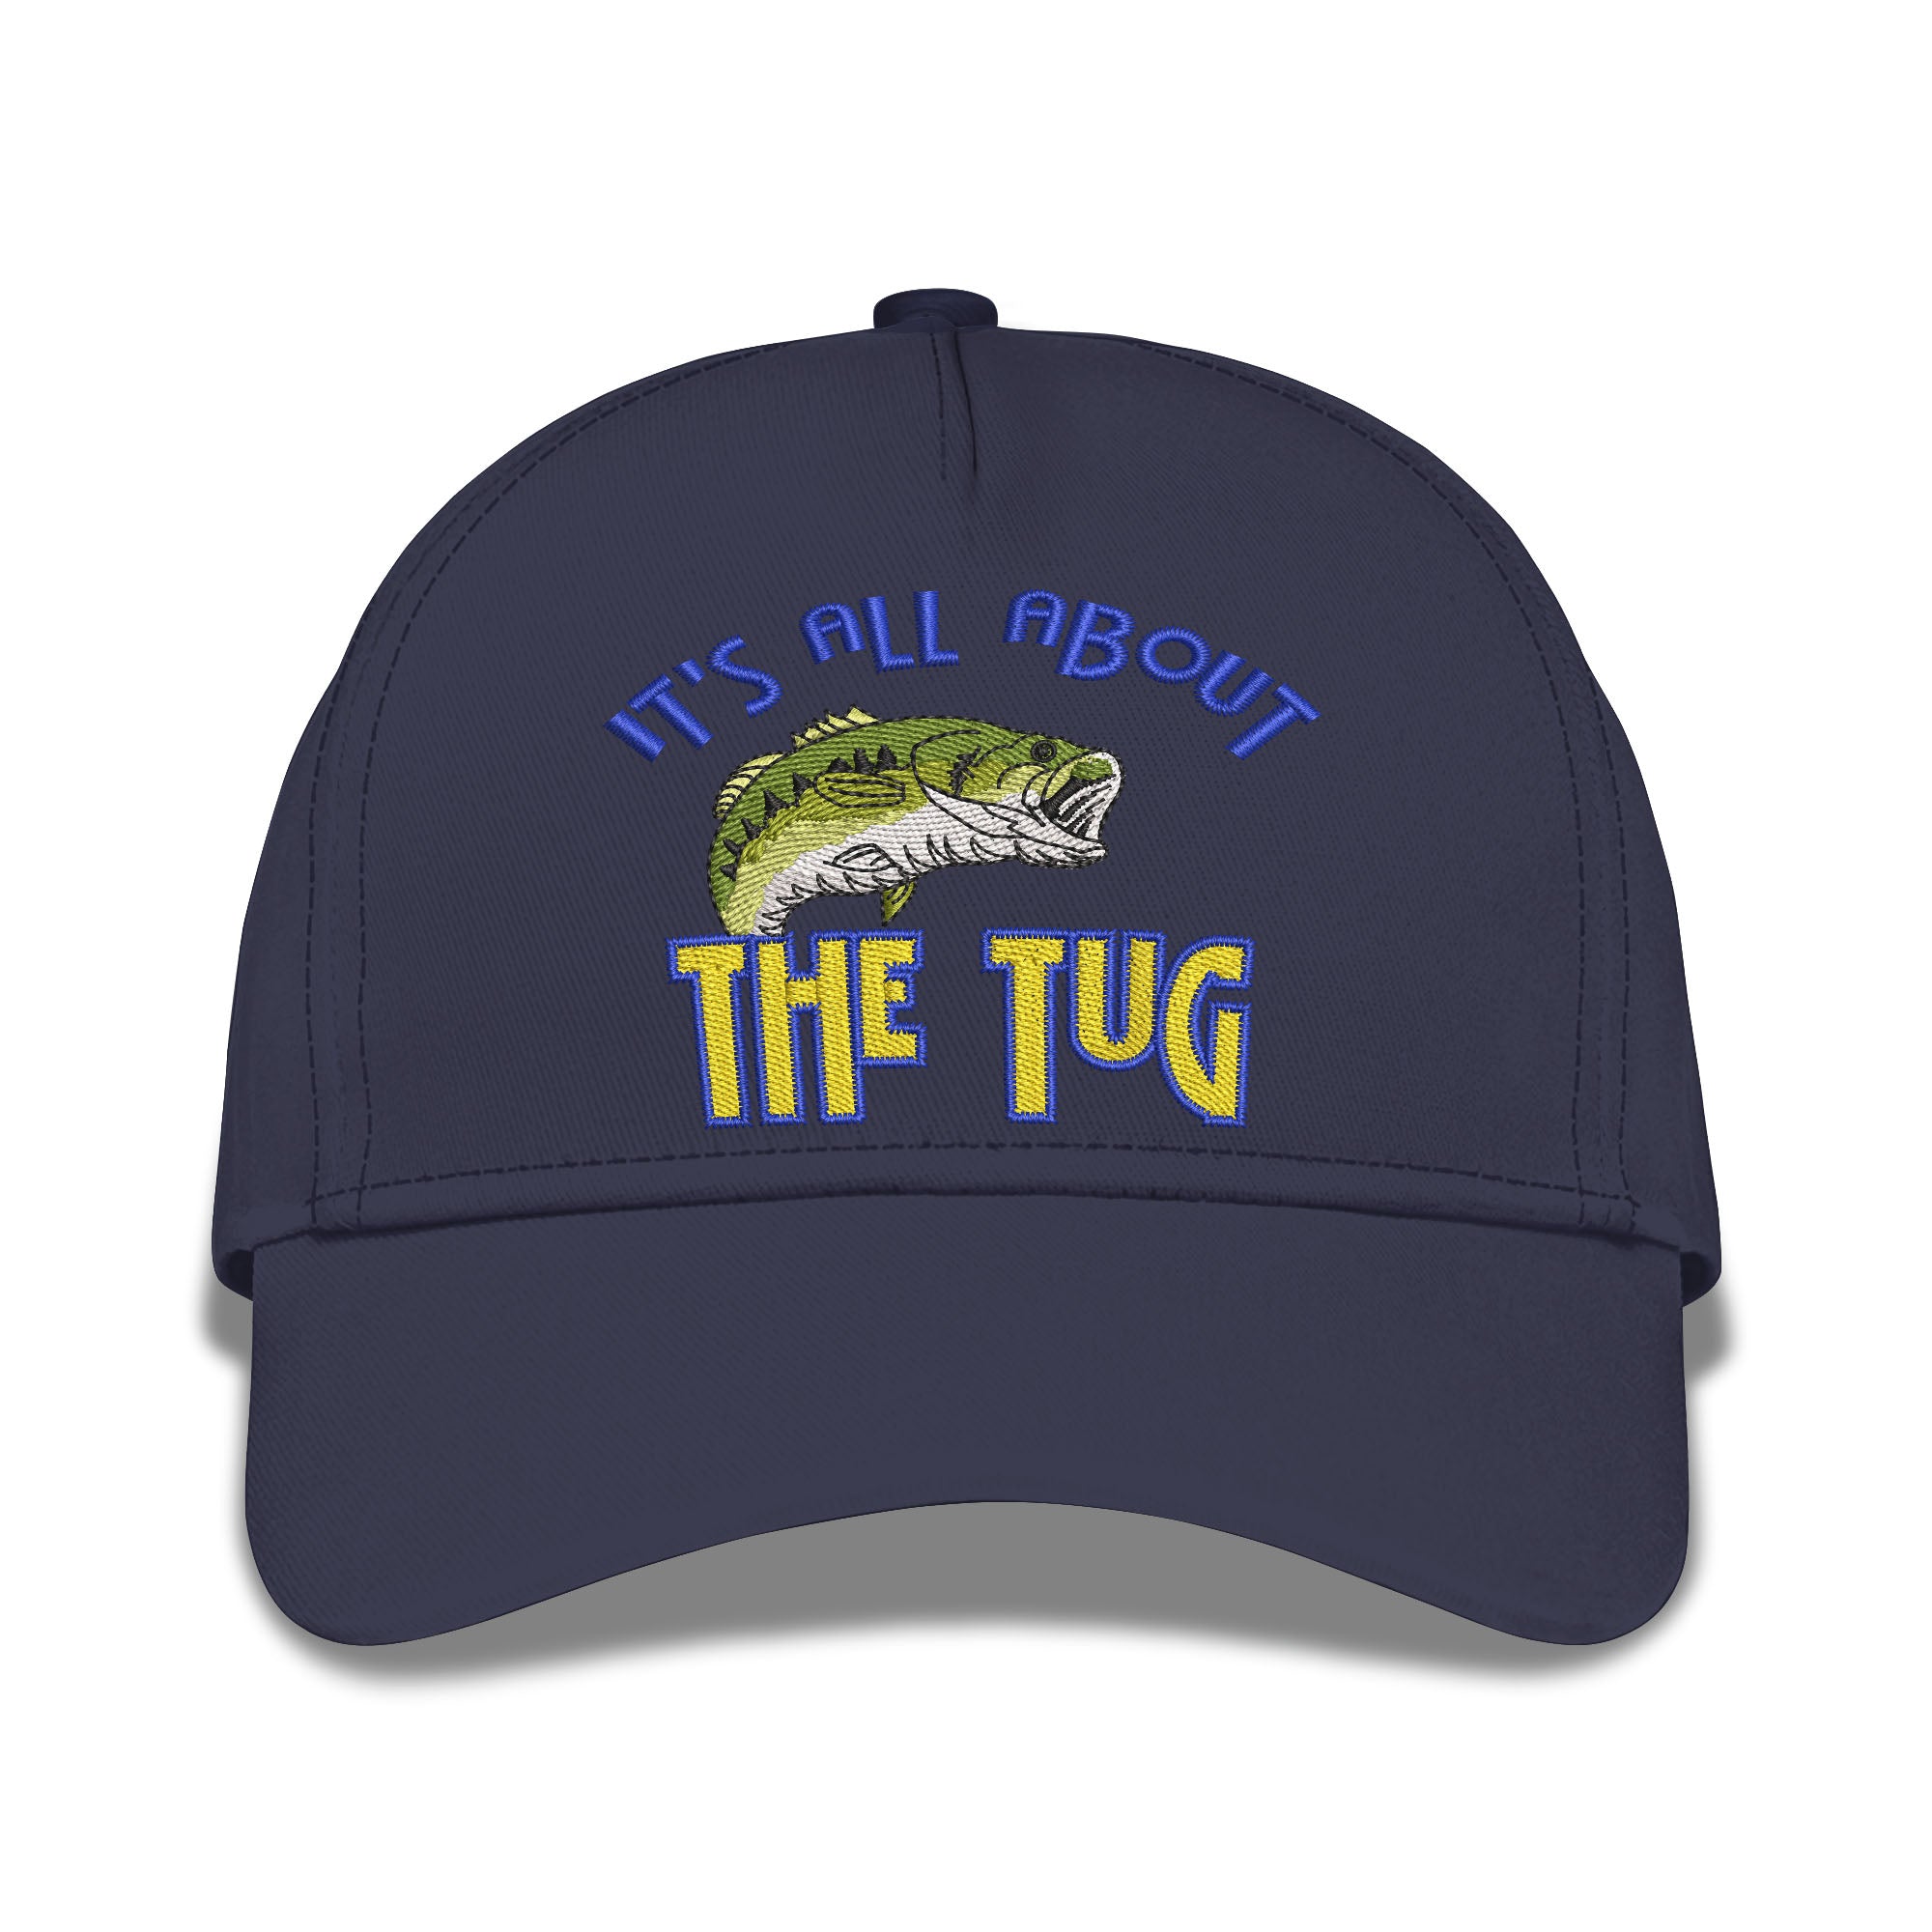 It's All About The Tug Embroidered Baseball Caps Fishing